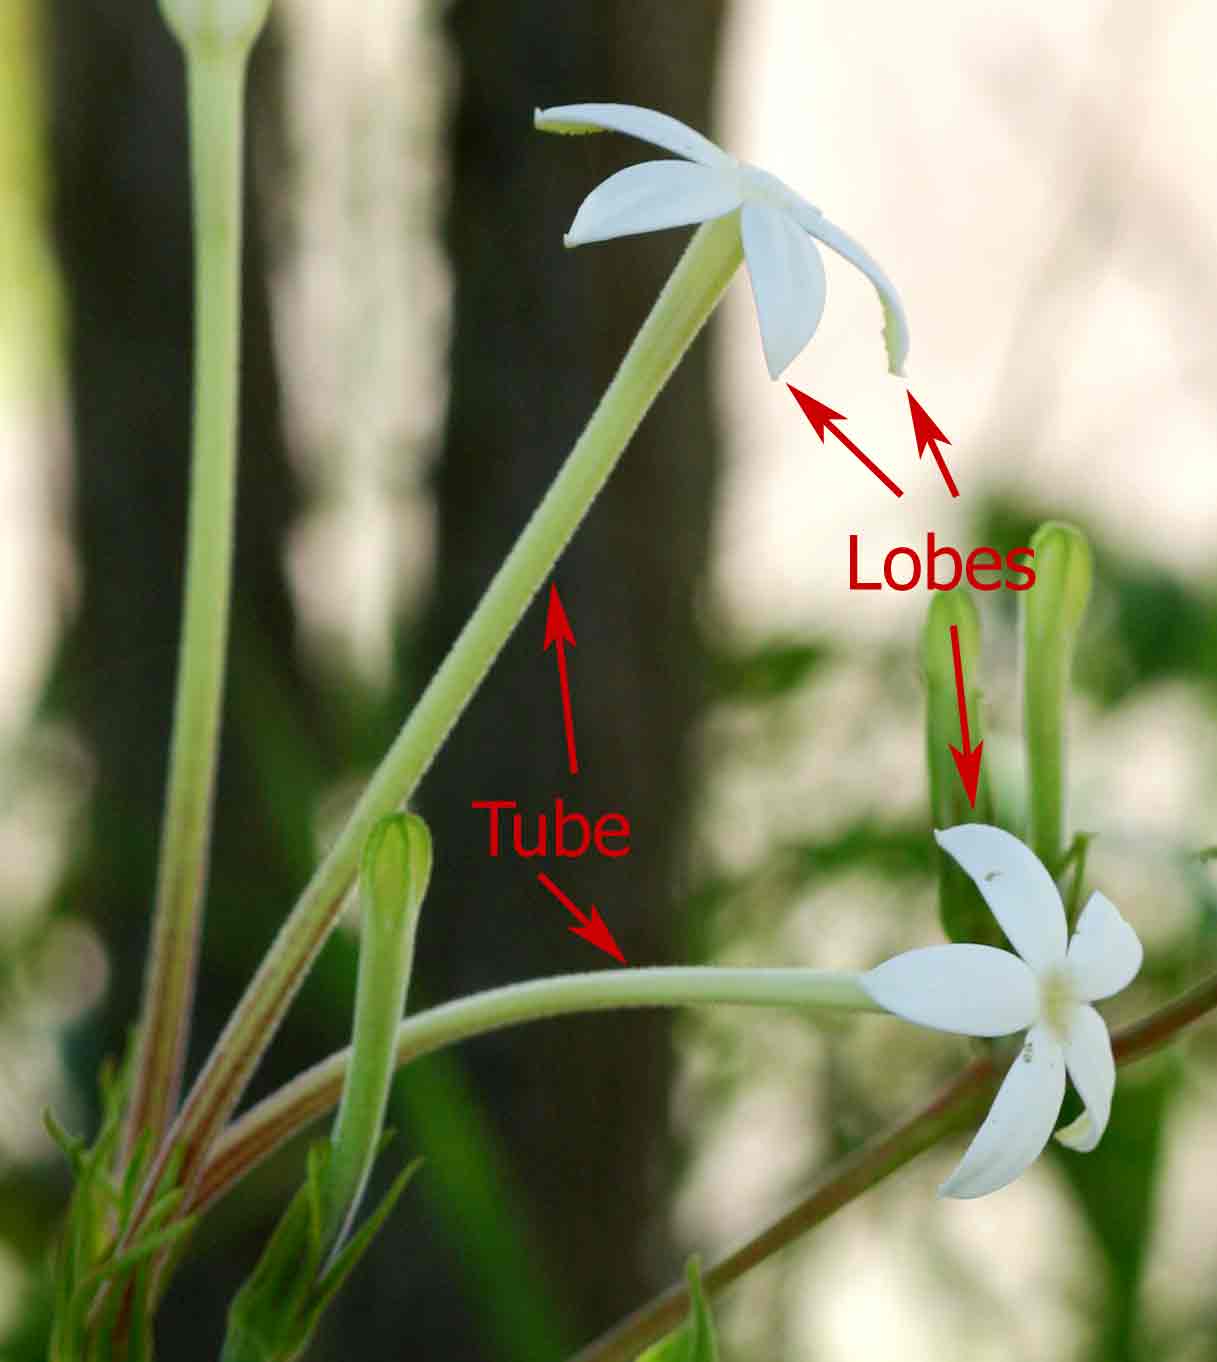 Image showing corolla tube and lobes